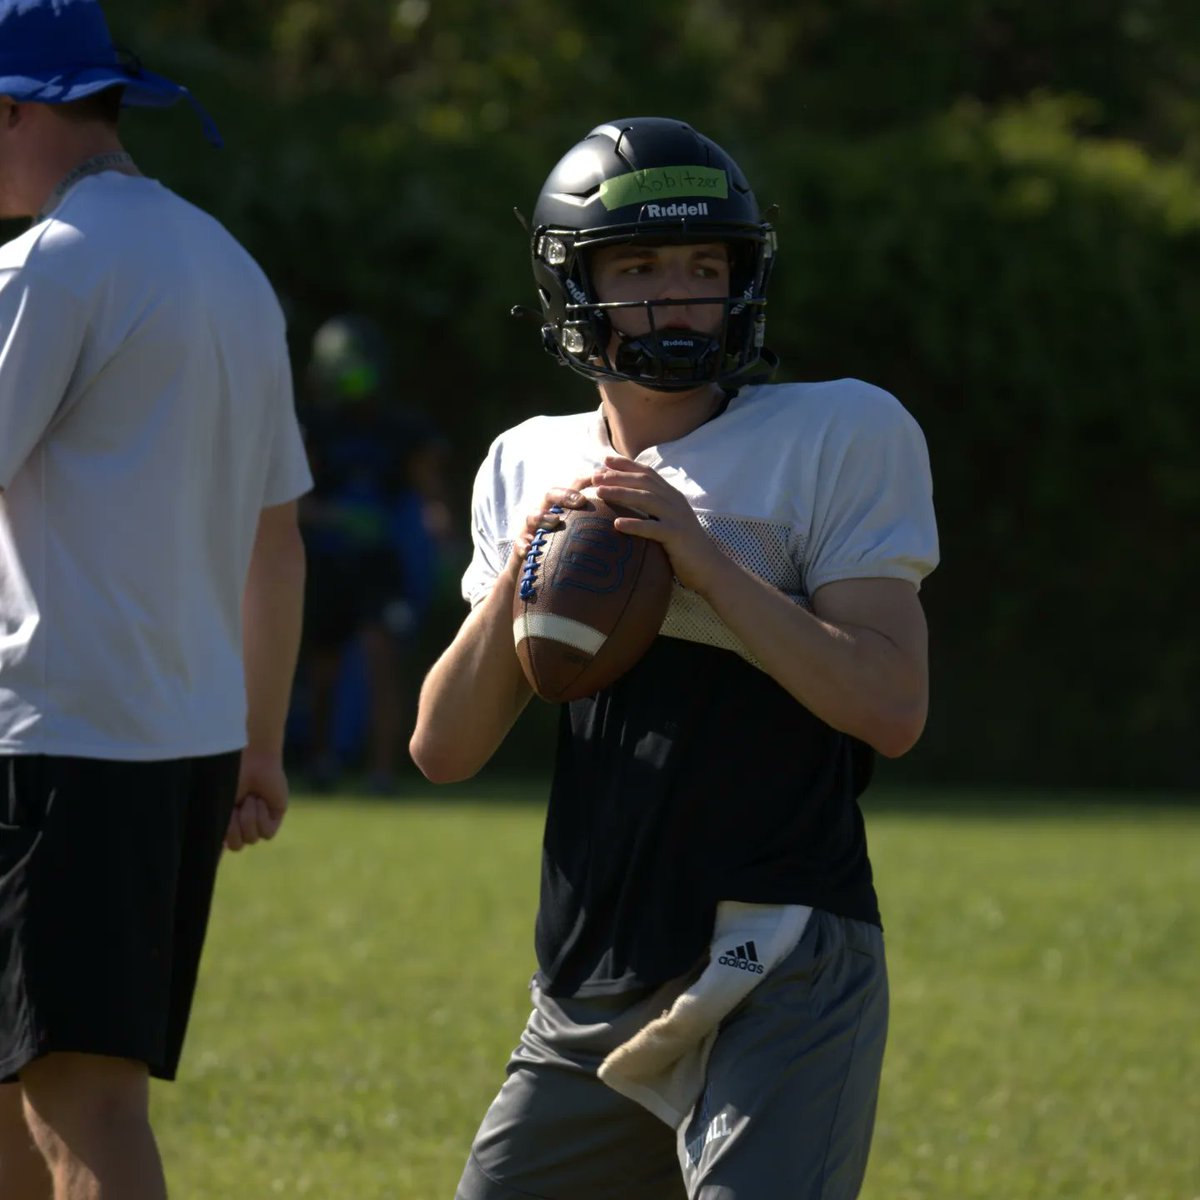 Pictures from Spring Practice @TheLake_FB can be seen at the link below - thanks guys for the hospitality